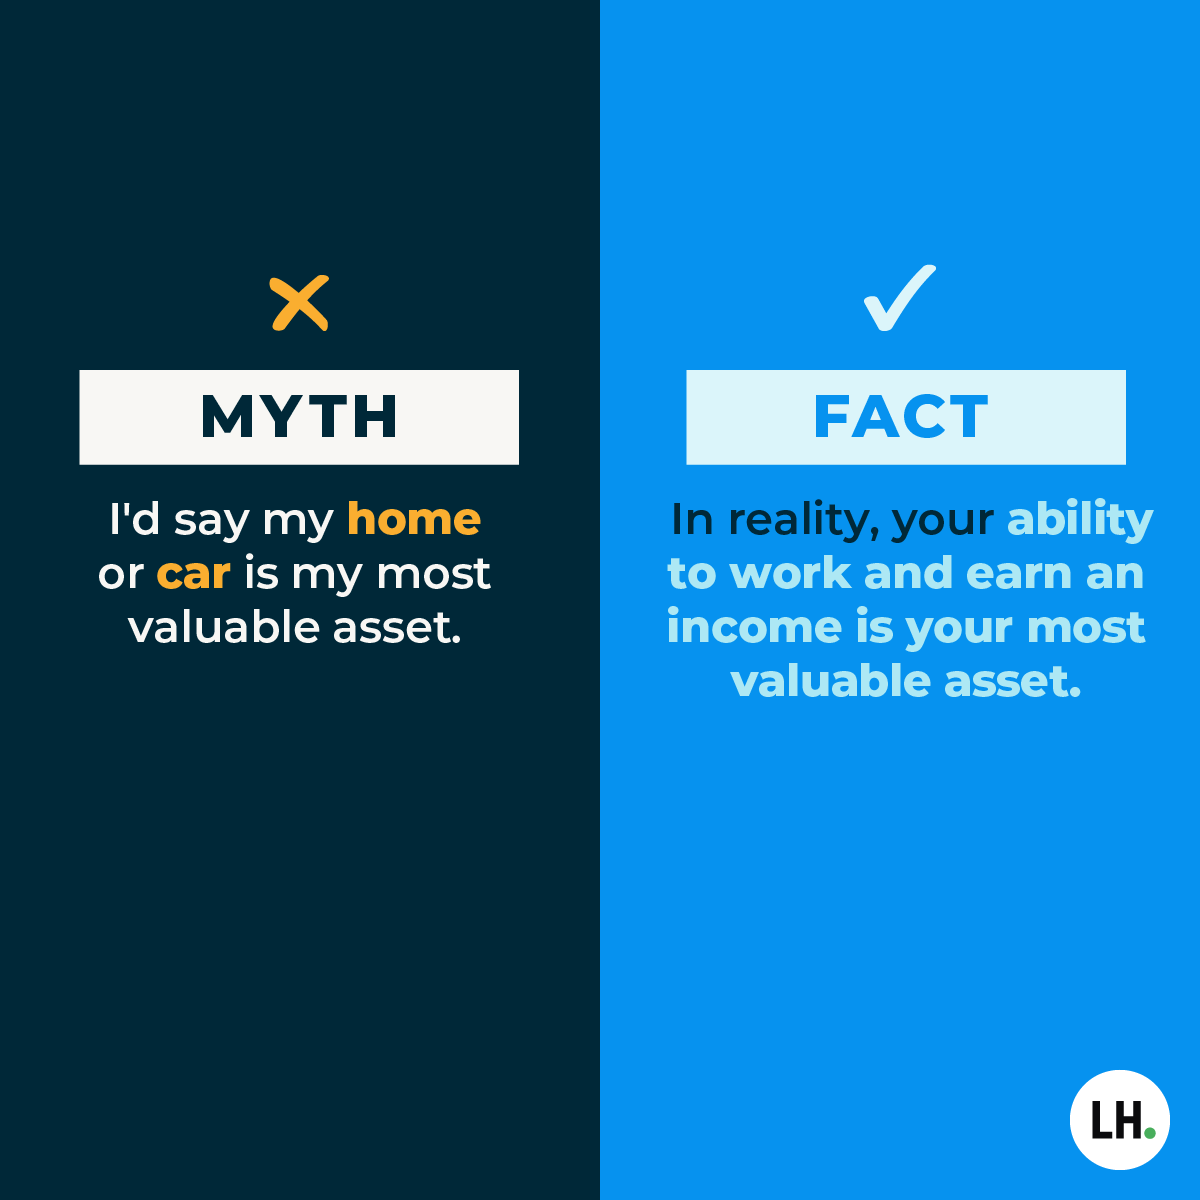 Myth! I don't need disability insurance because I have it through work.